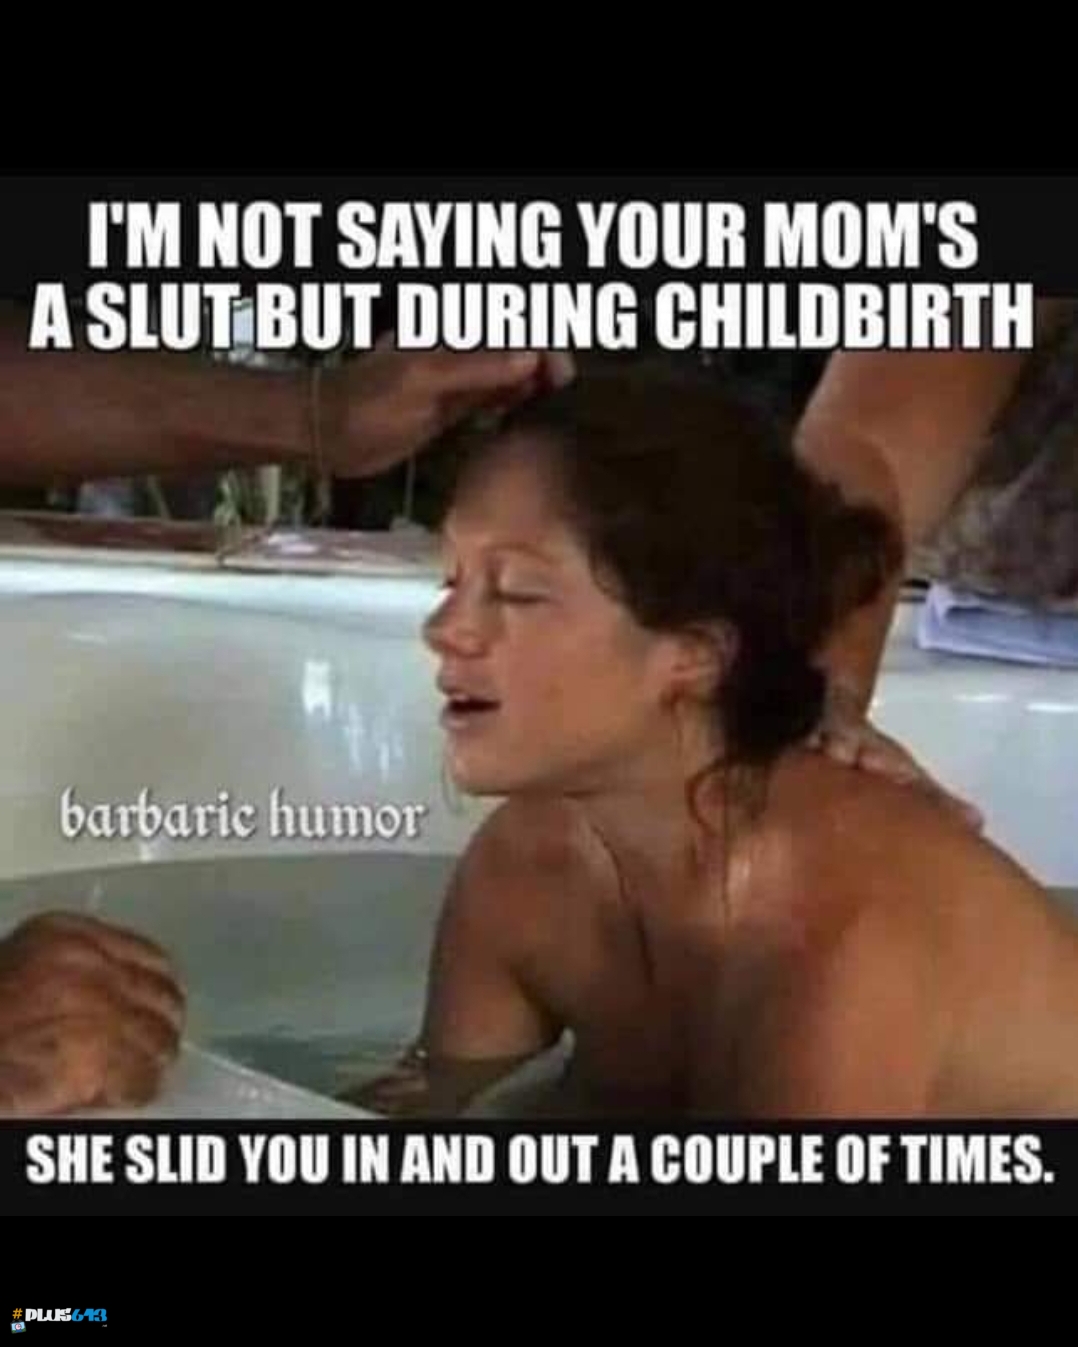 Your mom is a slut